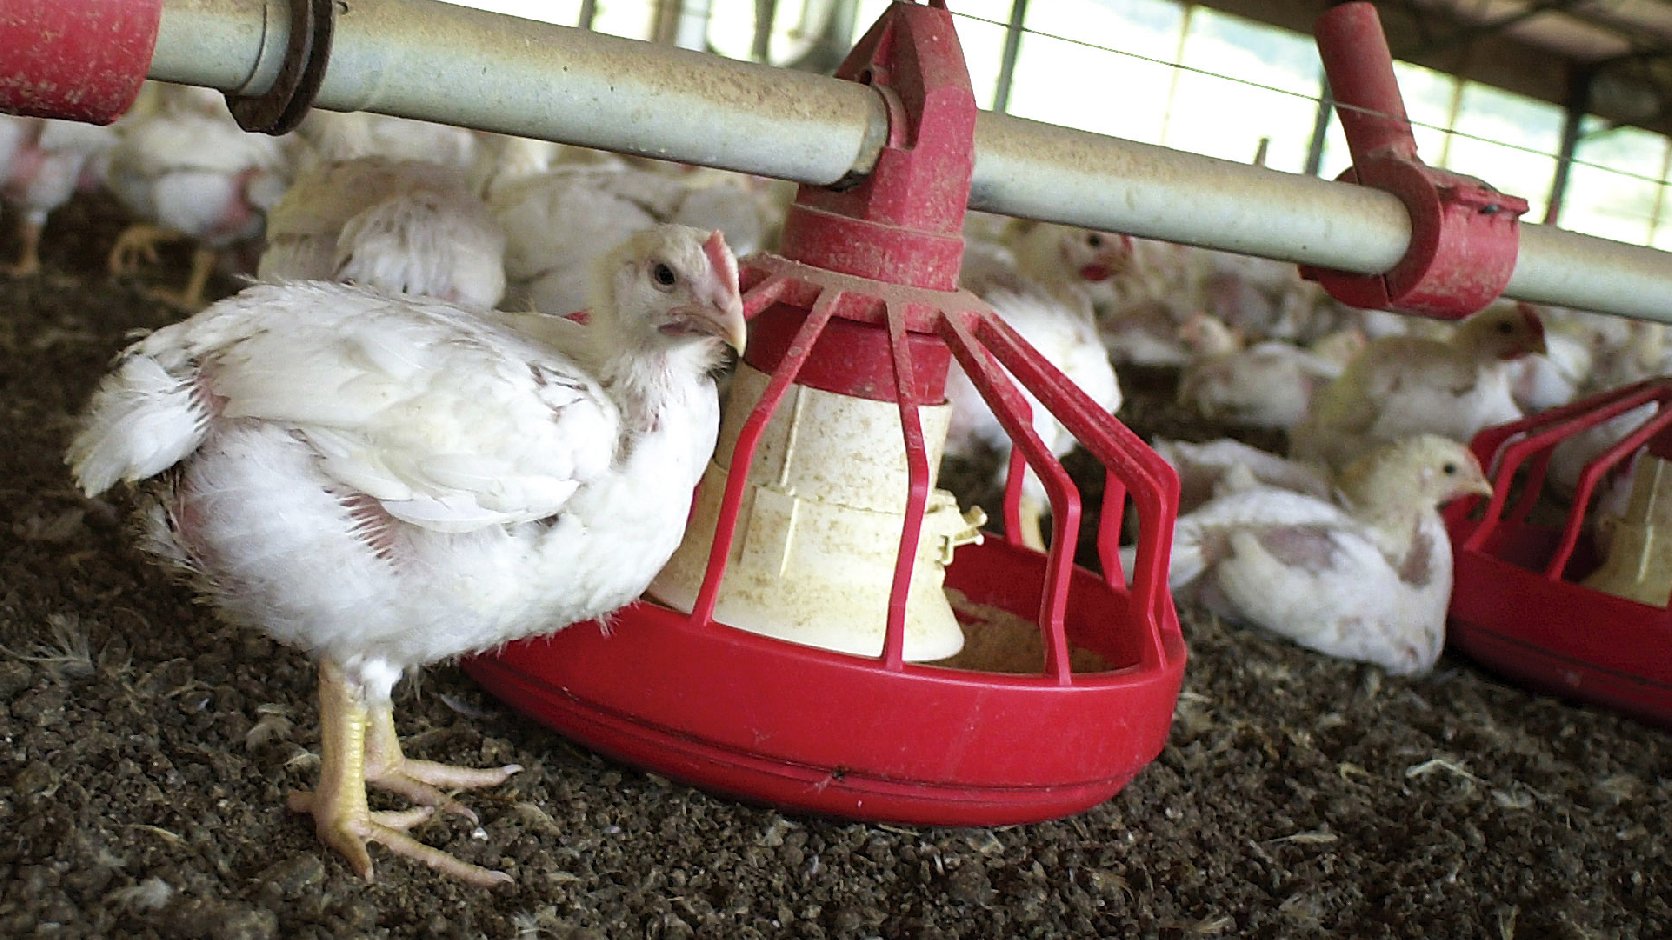 Chickens gather around a feeder in a Tyson Foods poultry house in Washington County, Ark. Photo: April L. Brown/AP